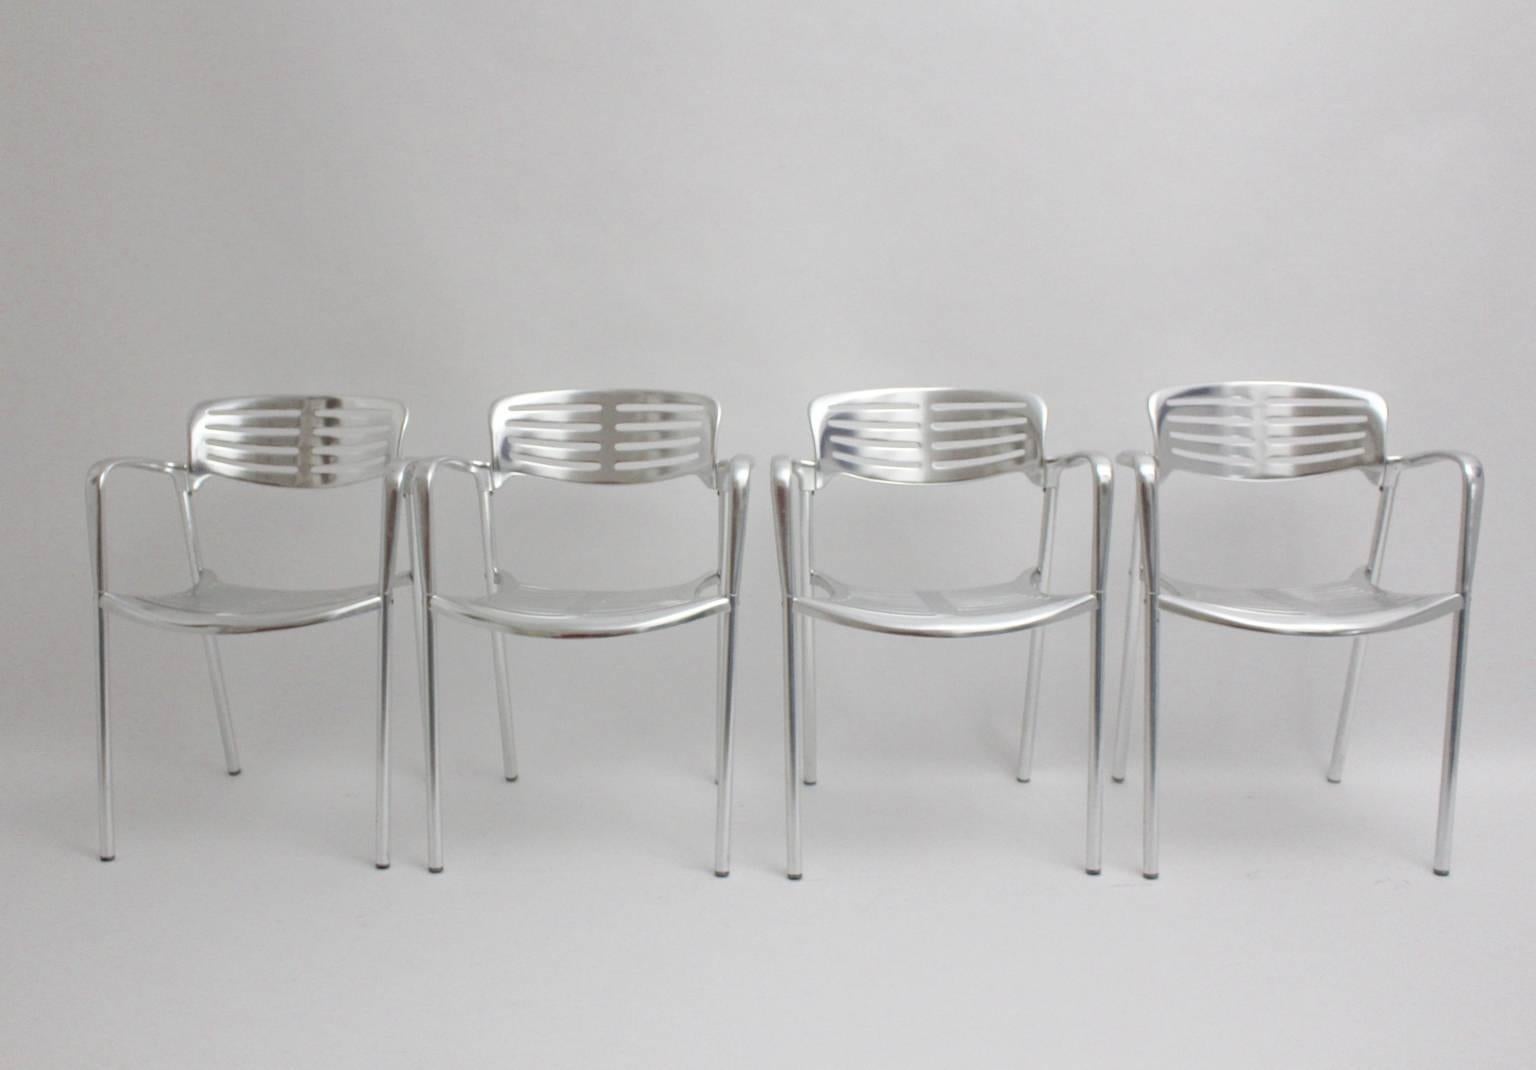 Mid-Century Modern Modern Aluminum Stacking Chairs Garden Chairs Dining Chairs Jorge Pensi 1980s For Sale